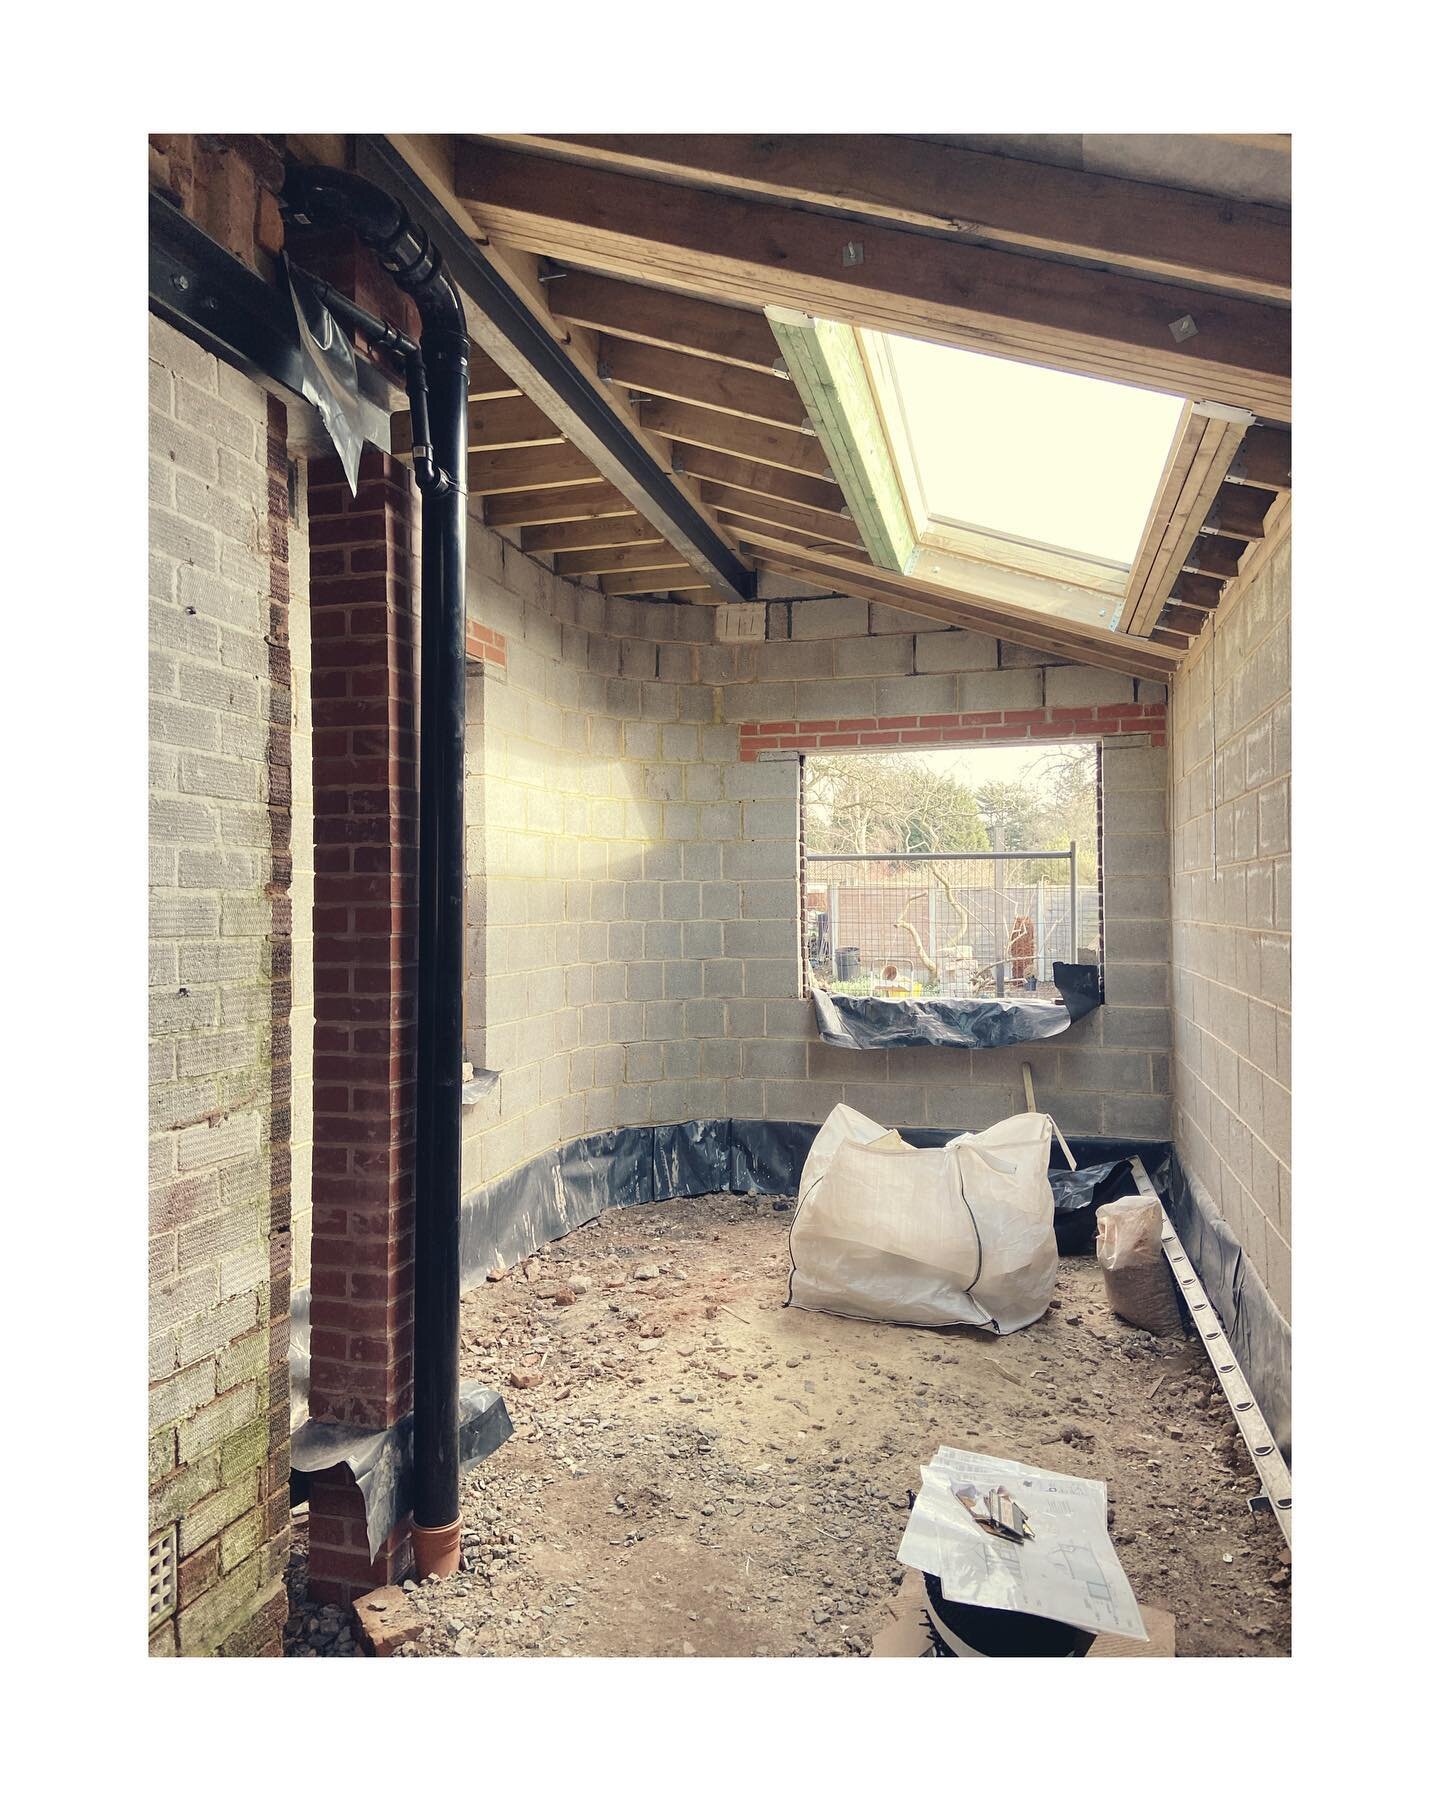 Makers House // BLD_121

A great site visit today in Kings Heath admiring the quality of the internal spaces. They will be even more special once the glazing is installed and the polished concrete floor is poured 👌

@brand.wood.home has done a super